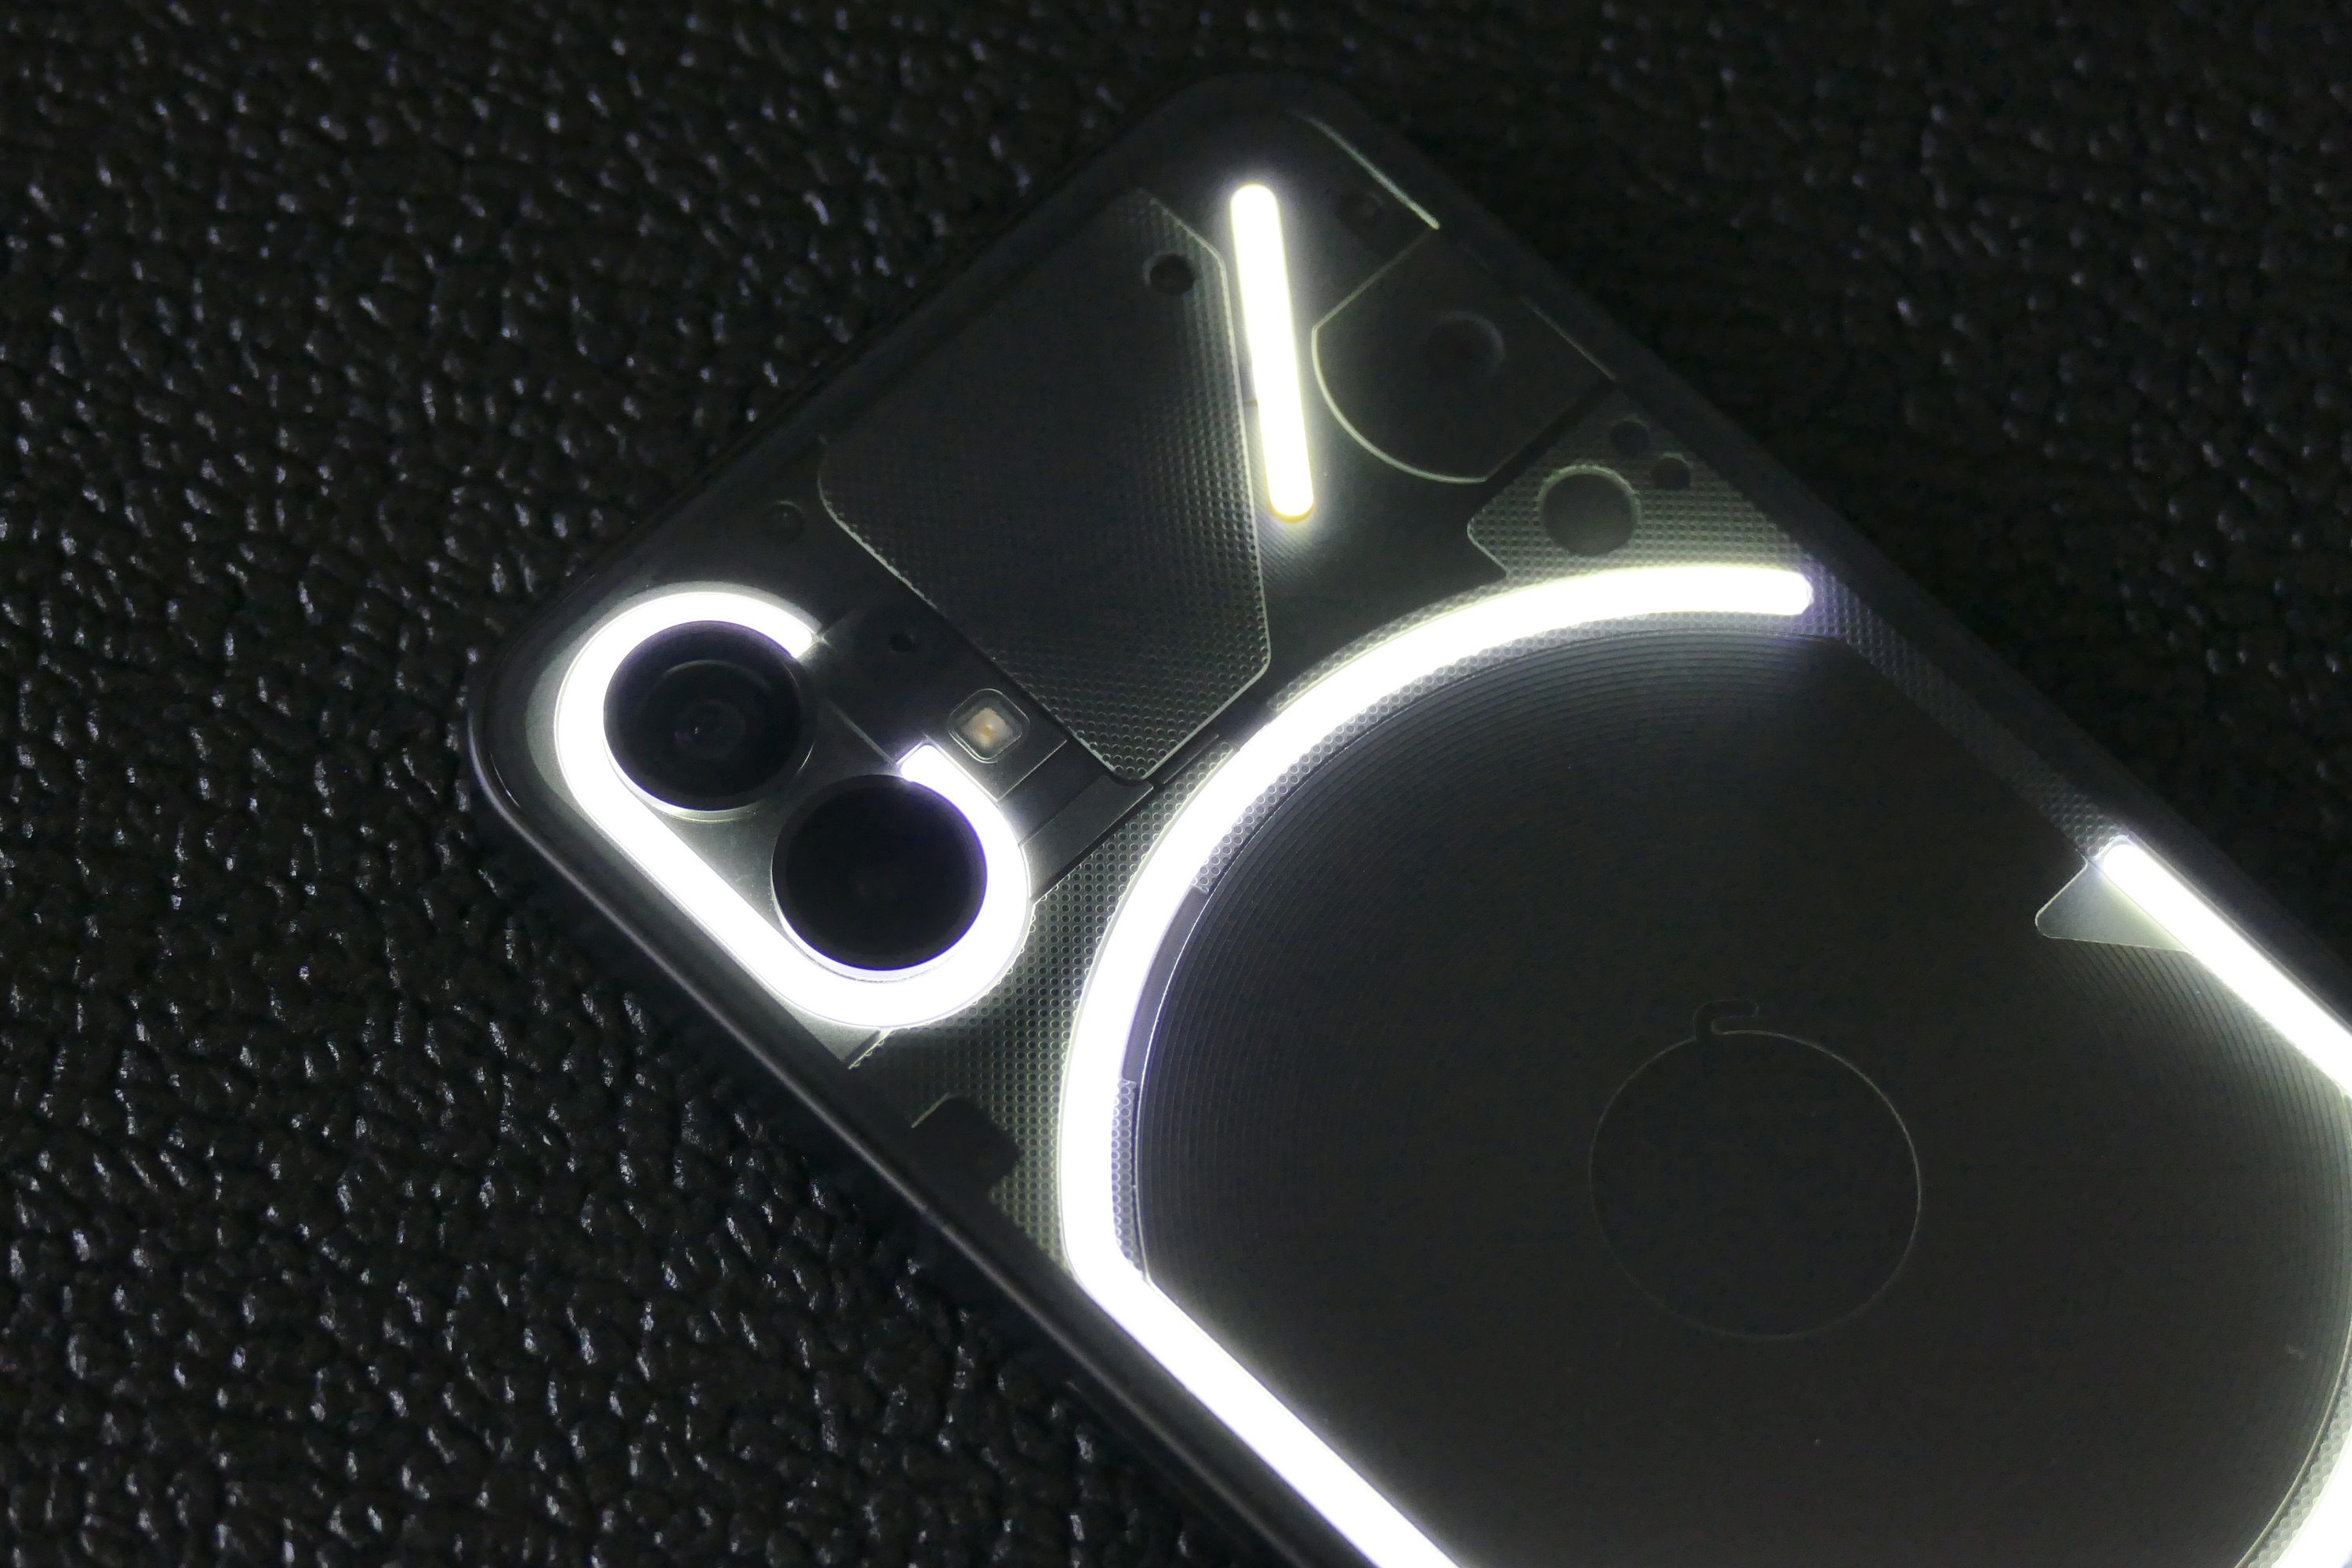 The Glyph Interface showing around the Nothing Phone 1's camera module.